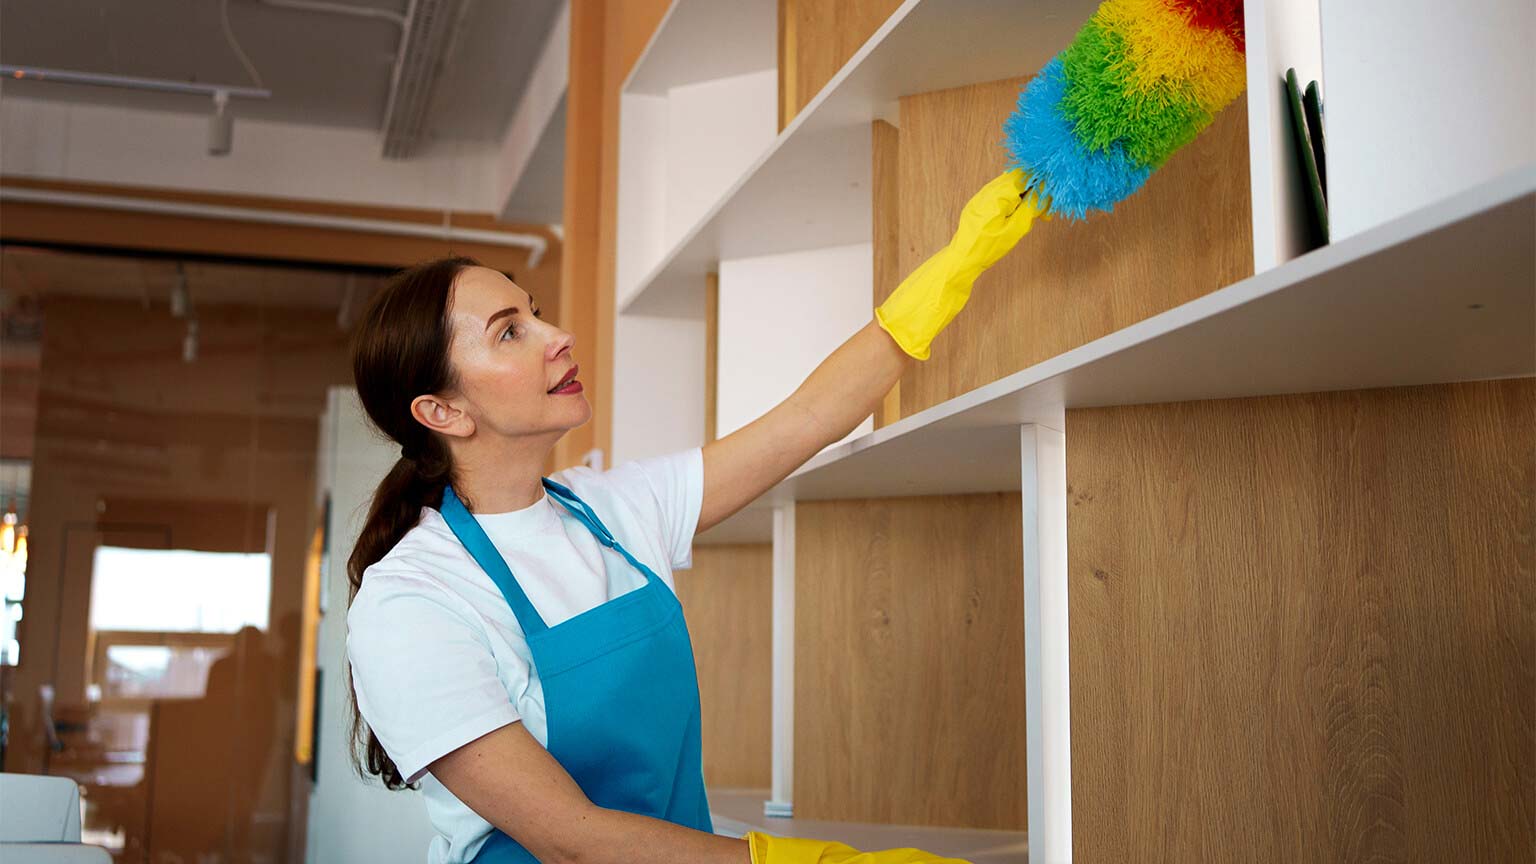 Residential Cleaning Dusting Cabinets